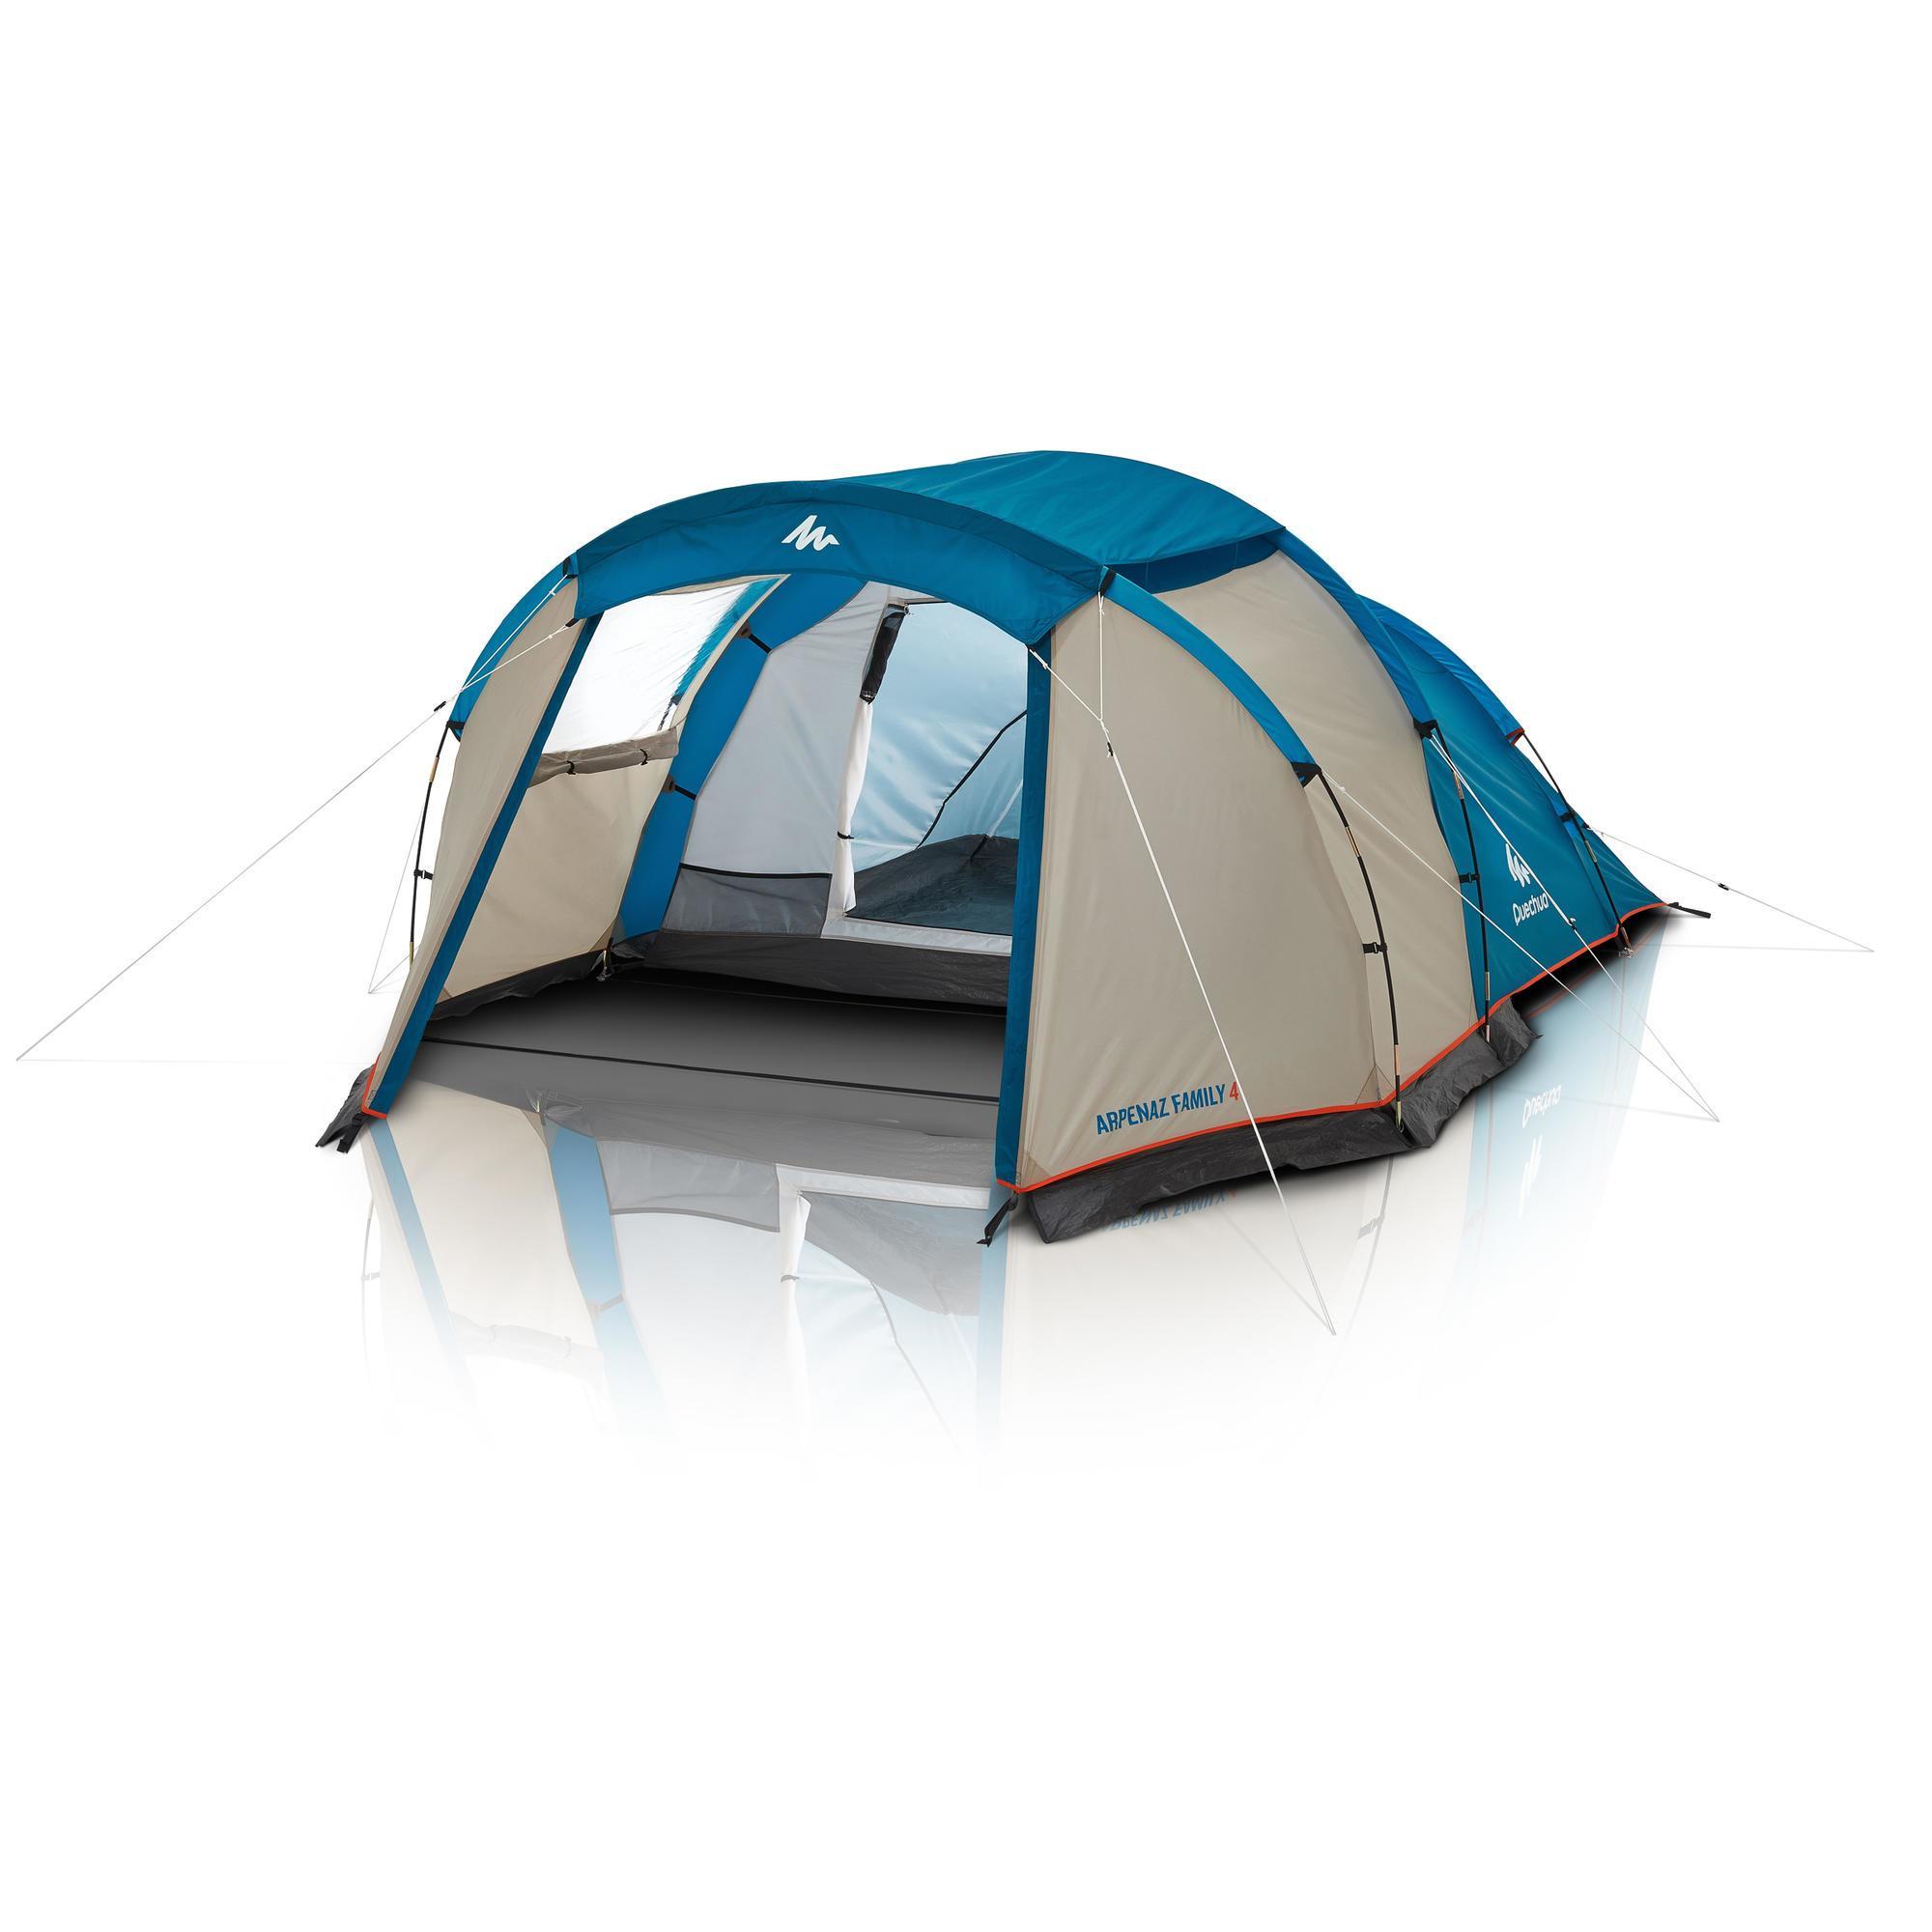 Camping tent with poles - Arpenaz 4 - 4 